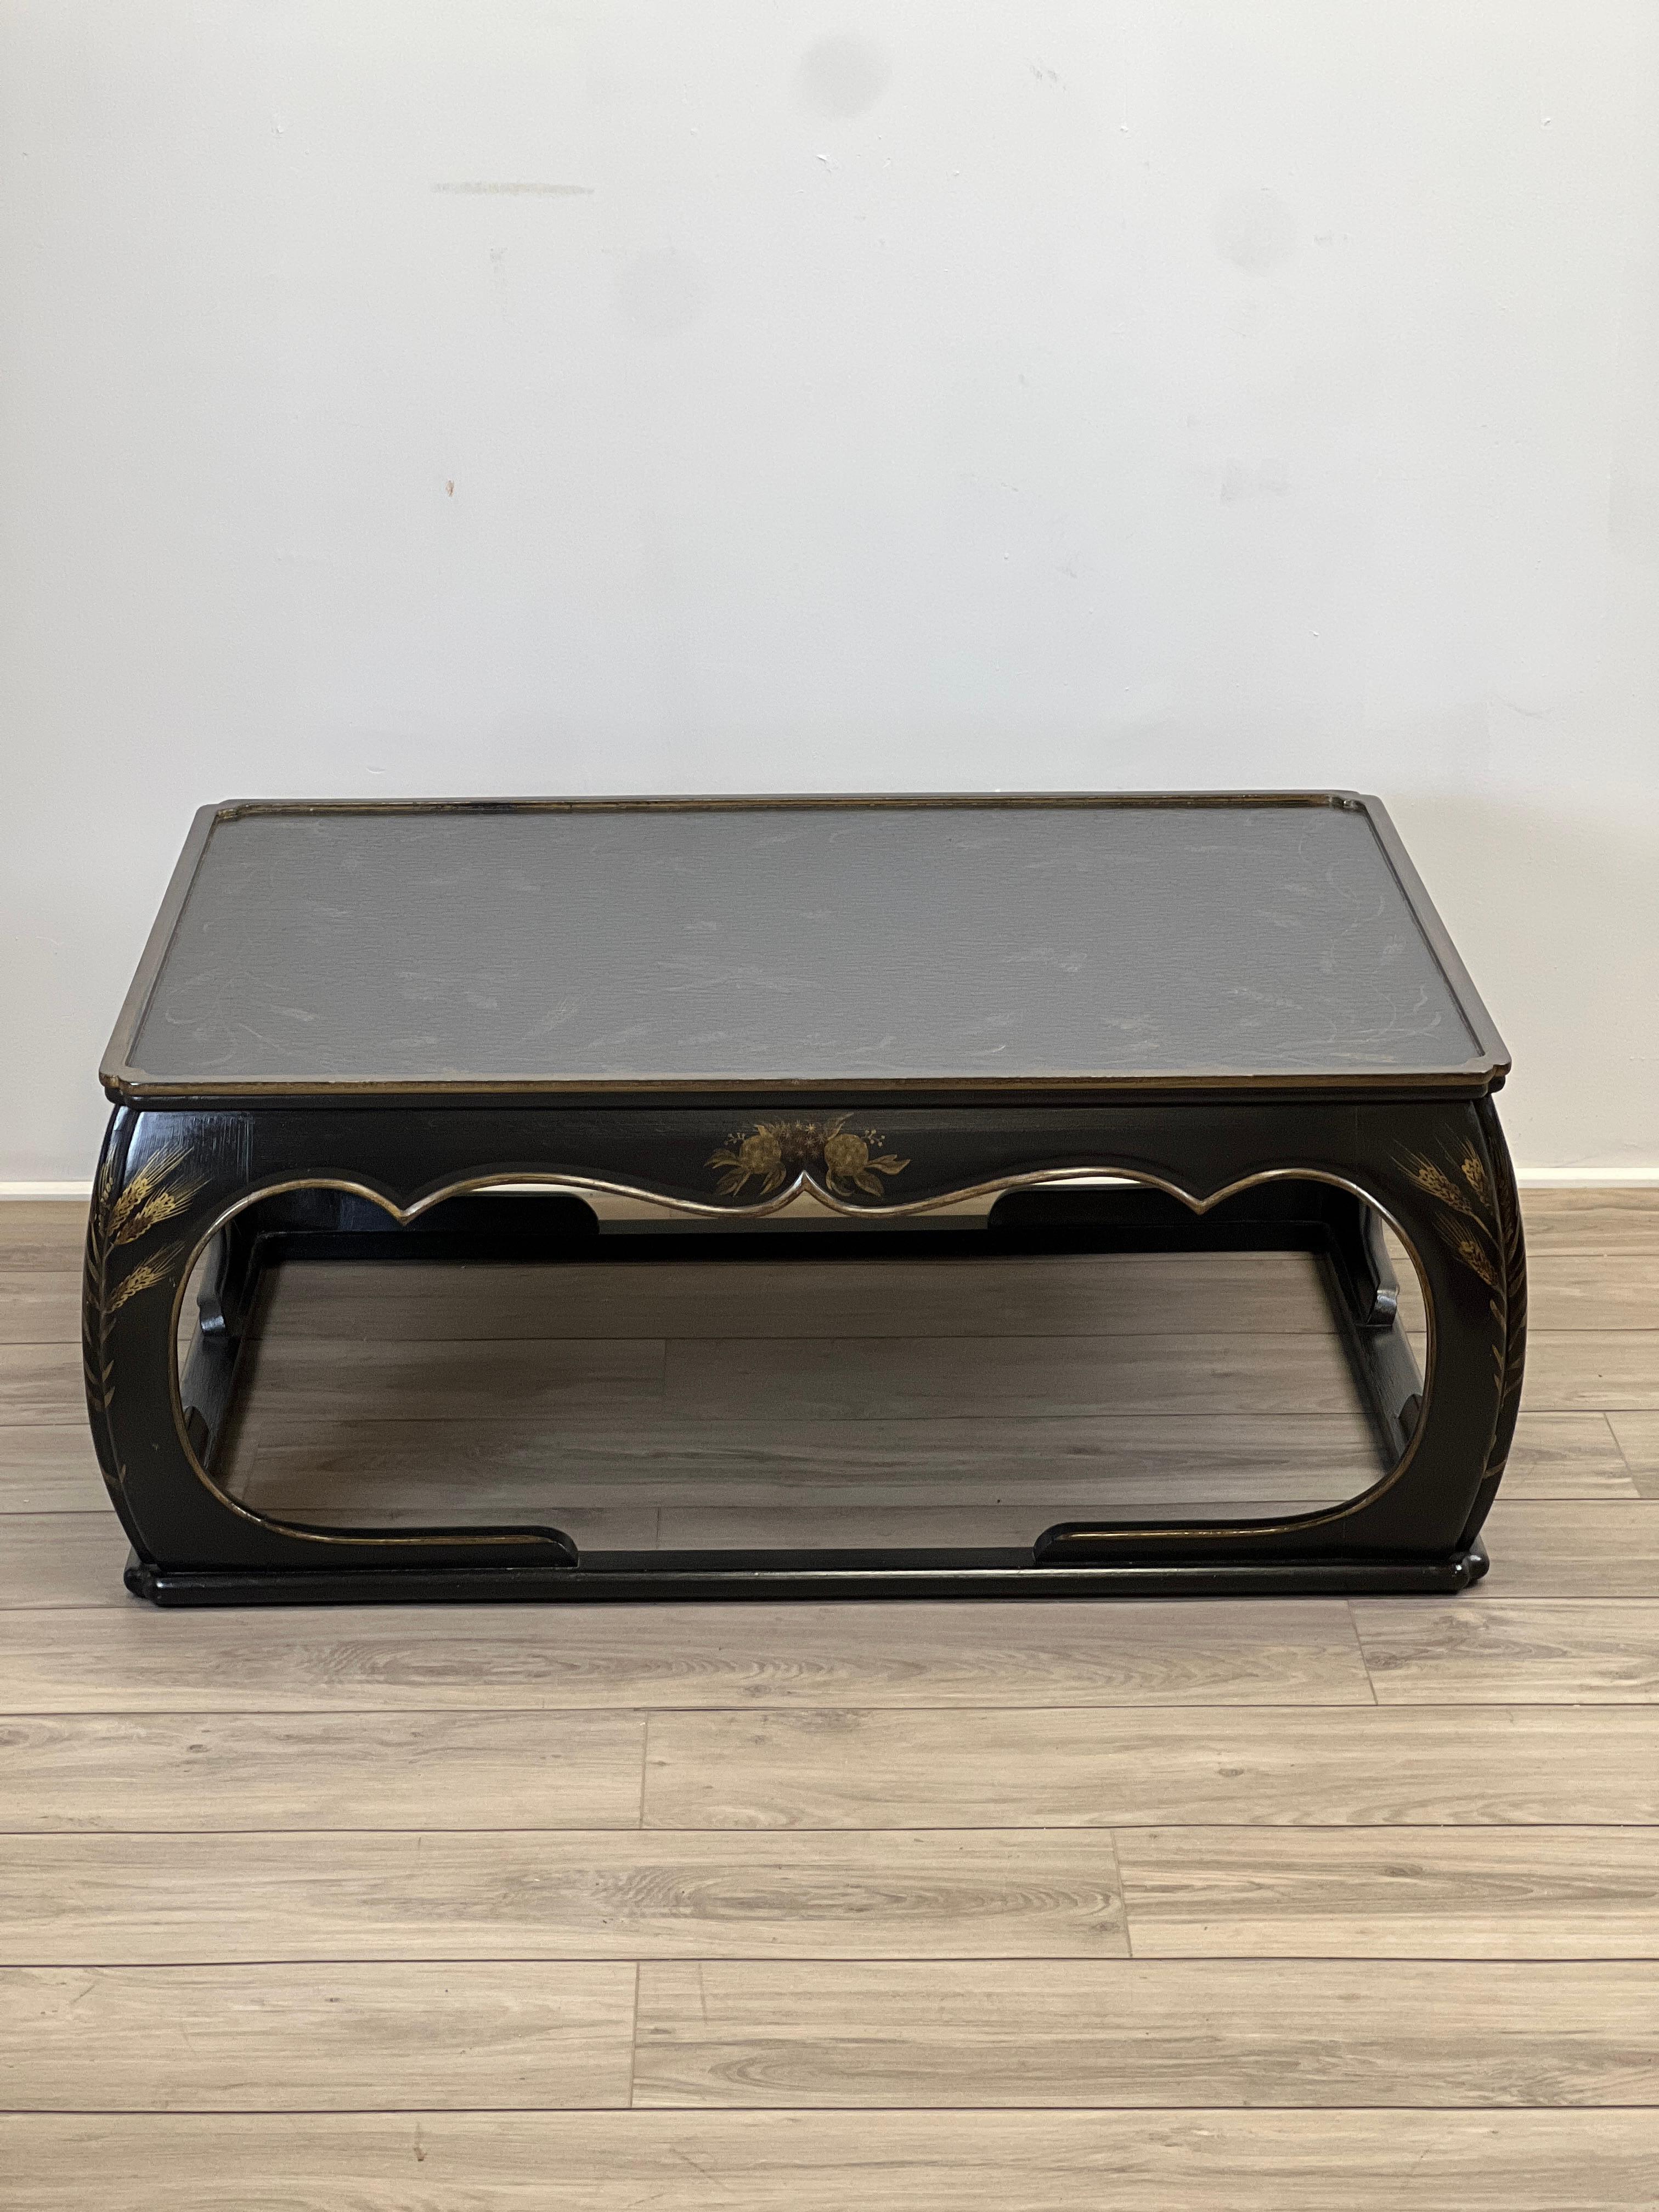 Featured is a well made black lacquered Chinoiserie style cocktail table. The item is hand-painted with gilt accents of a garden pond scene of butterfly's, dragon fly's, bees, grasshoppers, sparrows and what stalks. This is a solid and handsome